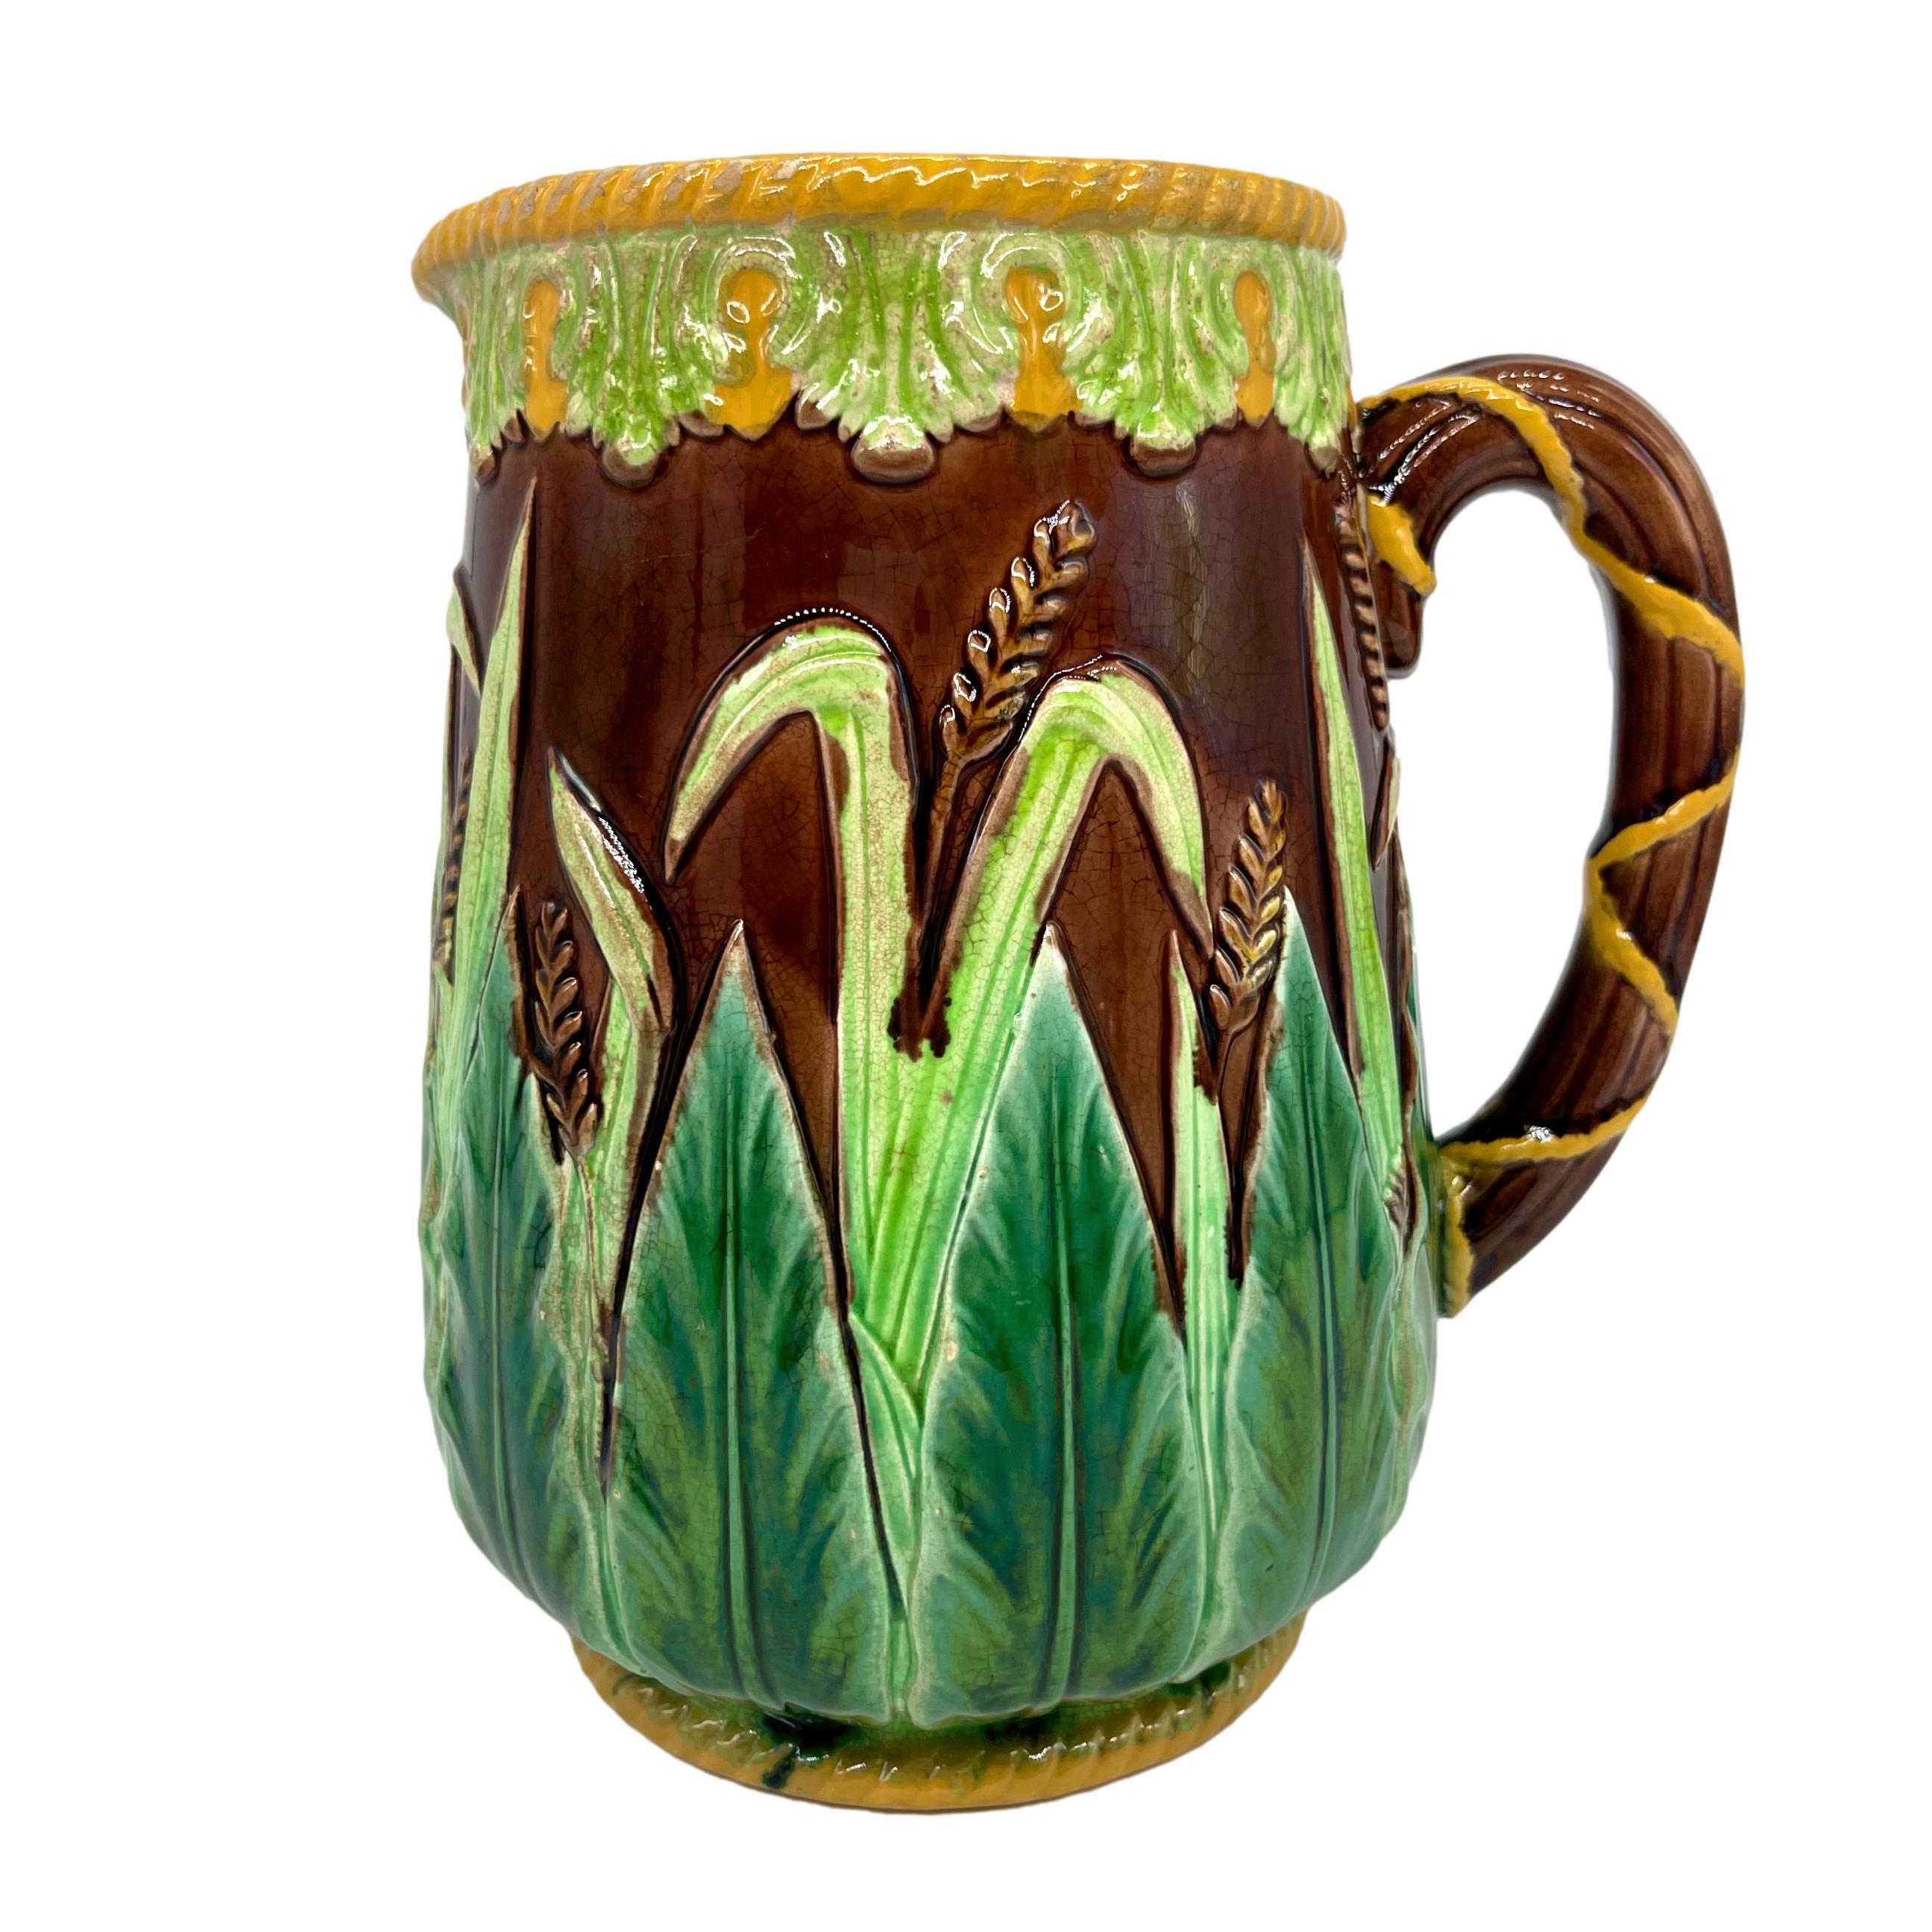 George Jones Majolica Pitcher, of baluster form with relief molded stiff acanthus leaves, grasses, and wheat on a brown ground, the top banded with stylized leaves glazed in chartreuse, with yellow glazed roping to the top rim and foot rim, the